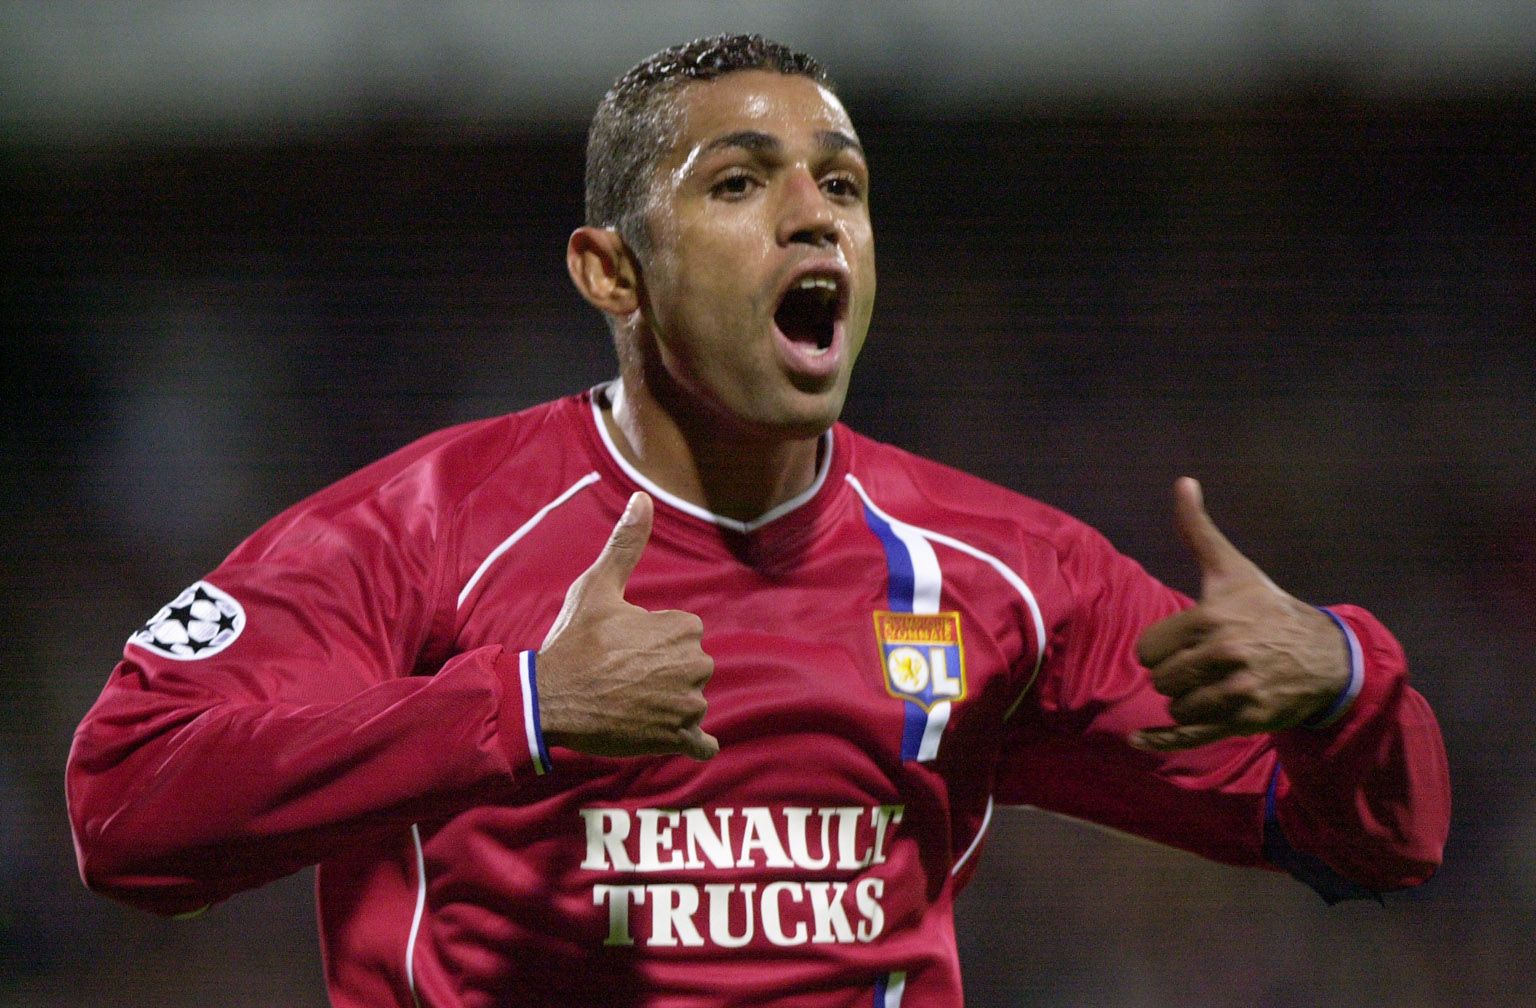 <p>                     Sonny Anderson spent just two seasons at Barcelona in the late 1990s, opting to return to France after falling out with coach Louis van Gaal.                   </p>                                      <p>                     Previously at Monaco, the Brazilian striker signed for Lyon in a deal worth around €19 million and went on to score 94 goals in 161 appearances for OL. He also won two Ligue 1 titles in a successful spell back in France.                   </p>